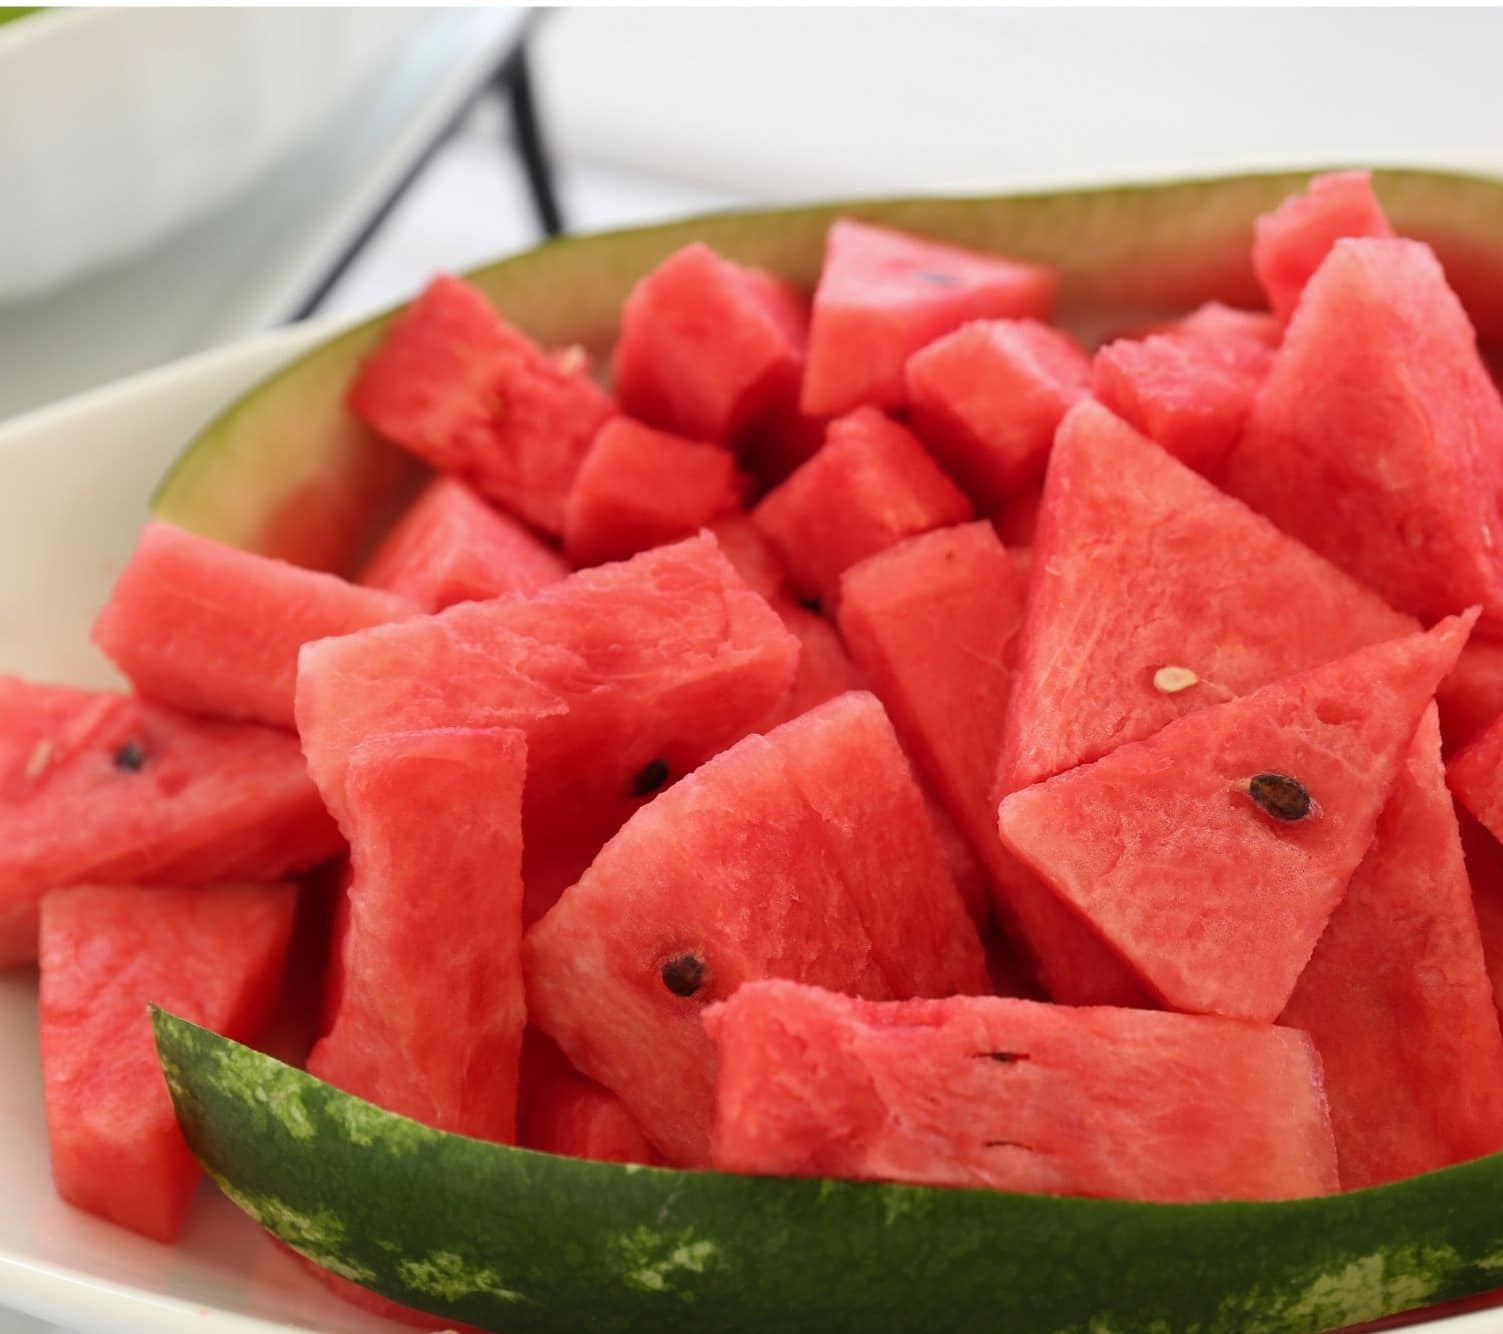 bowl of cut up watermelon